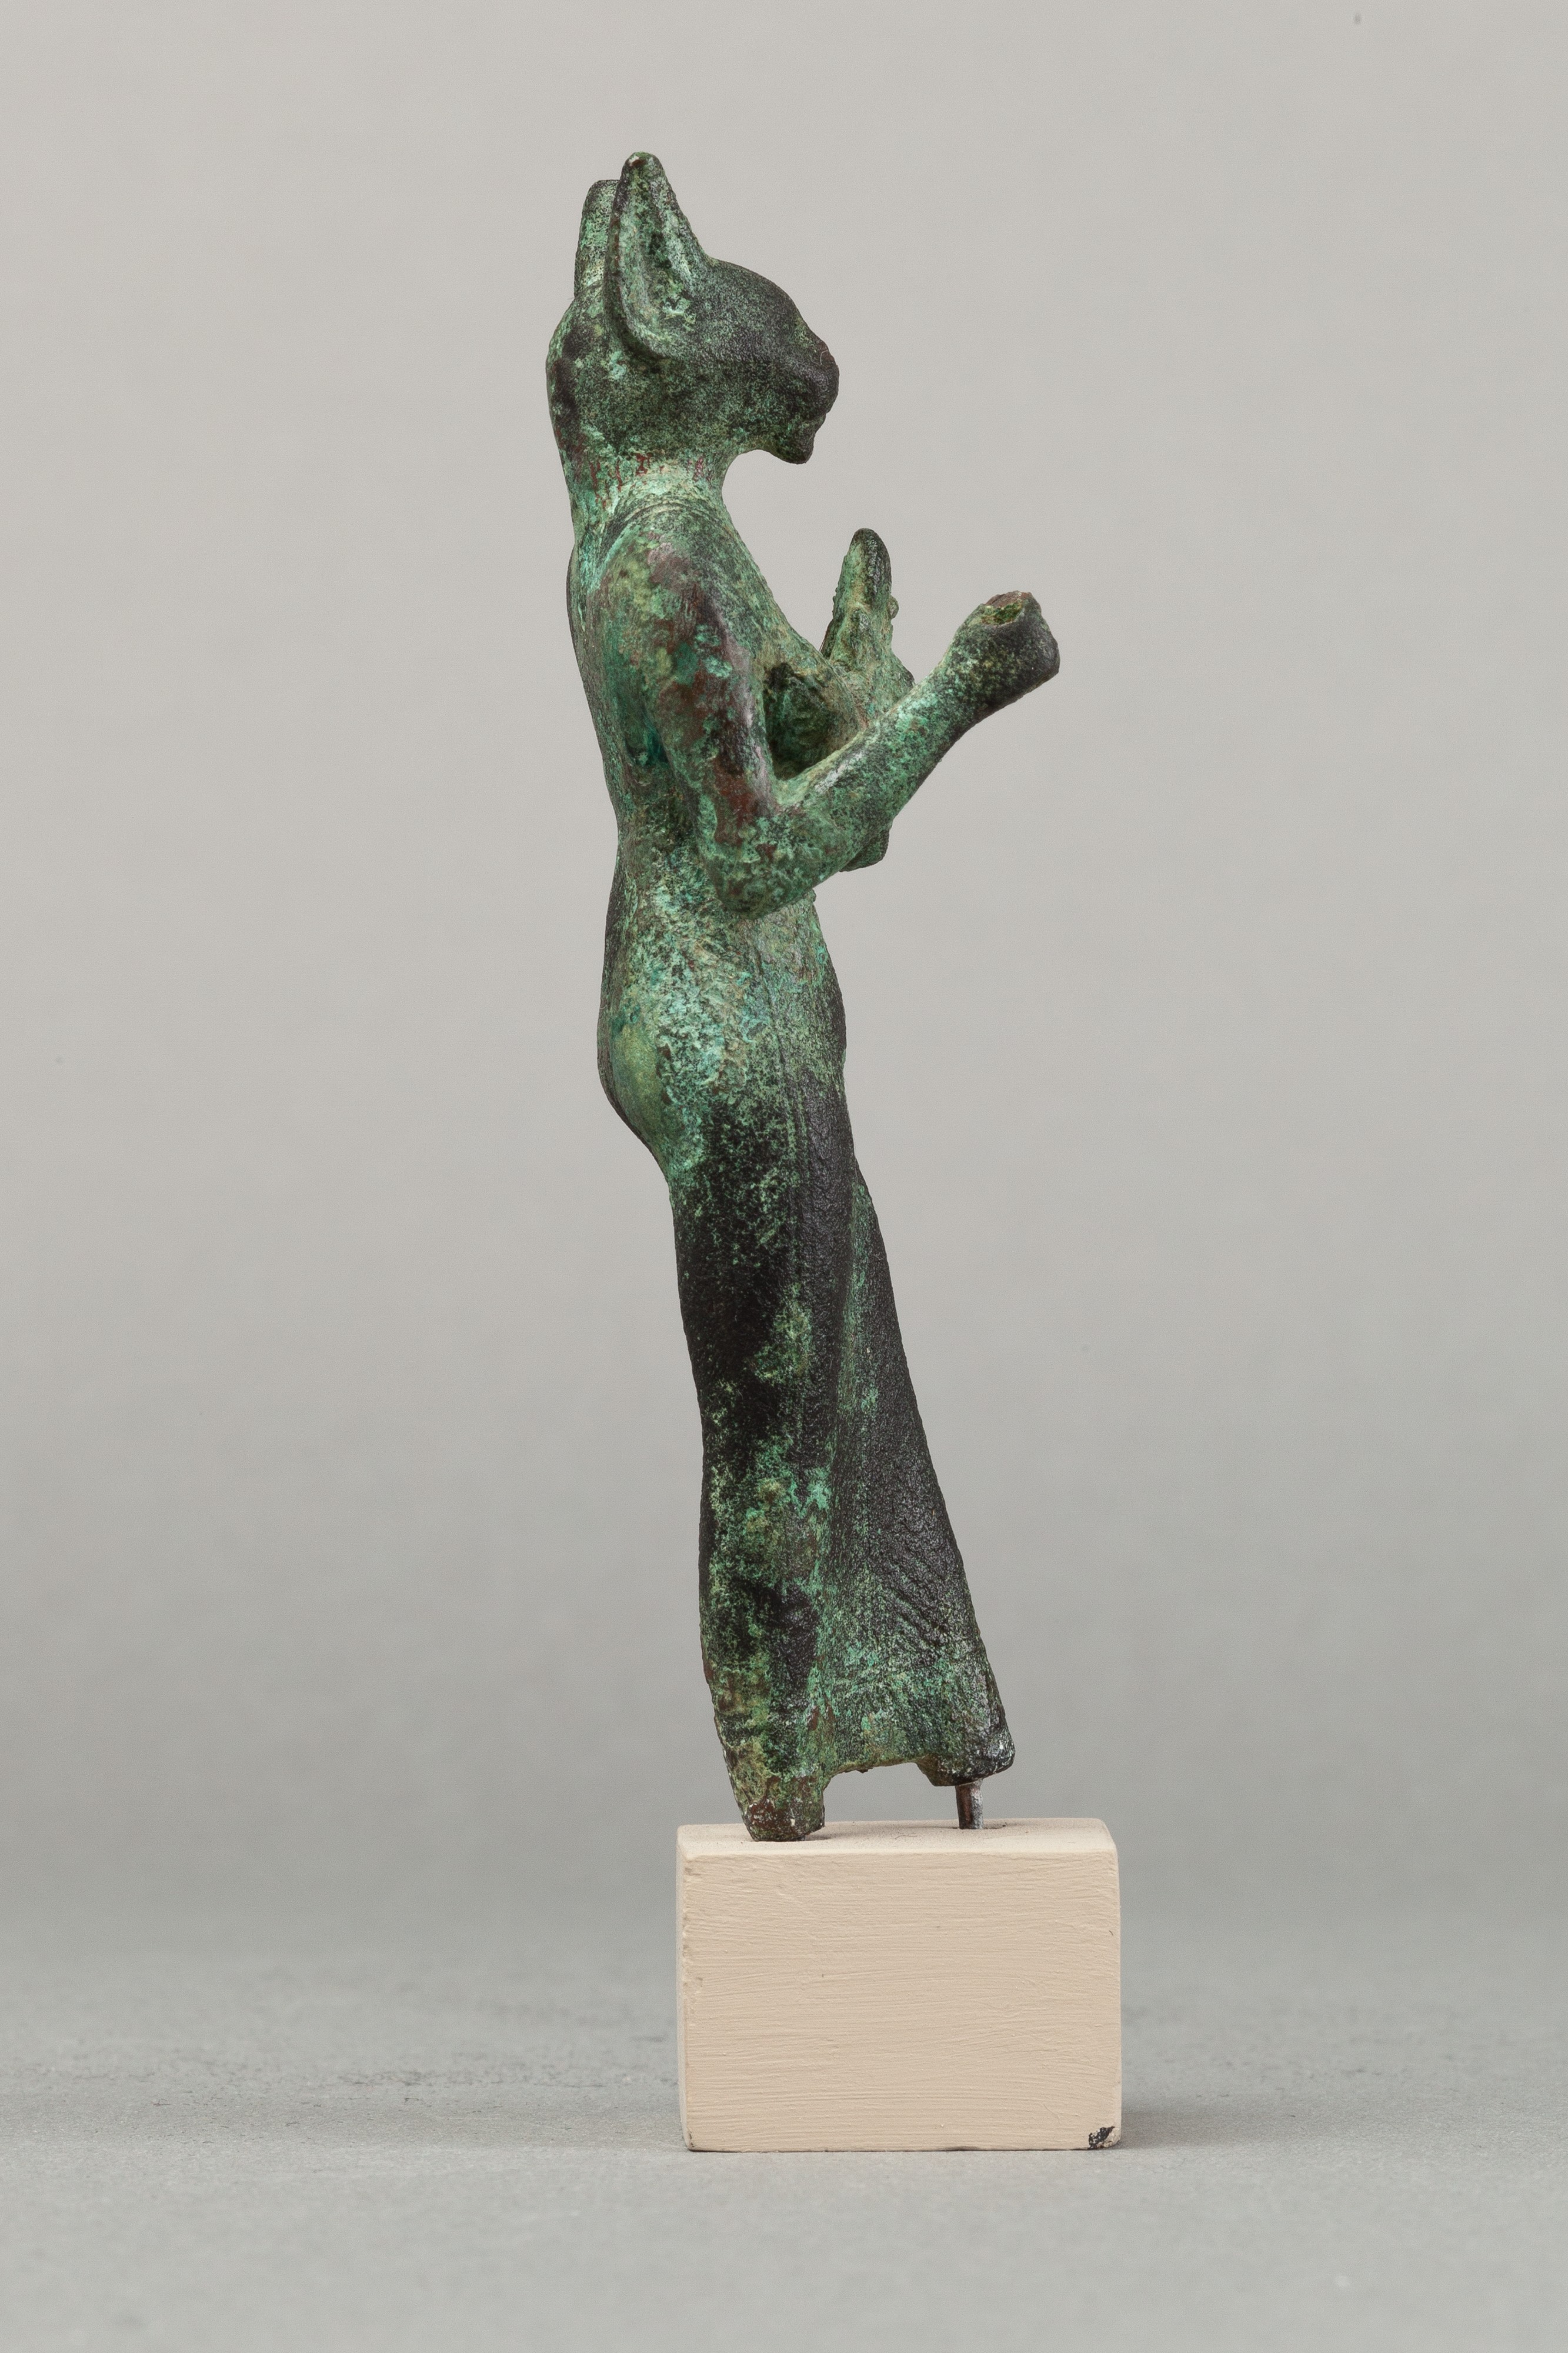 Bastet Holding An Aegis Late Period Ptolemaic Period The